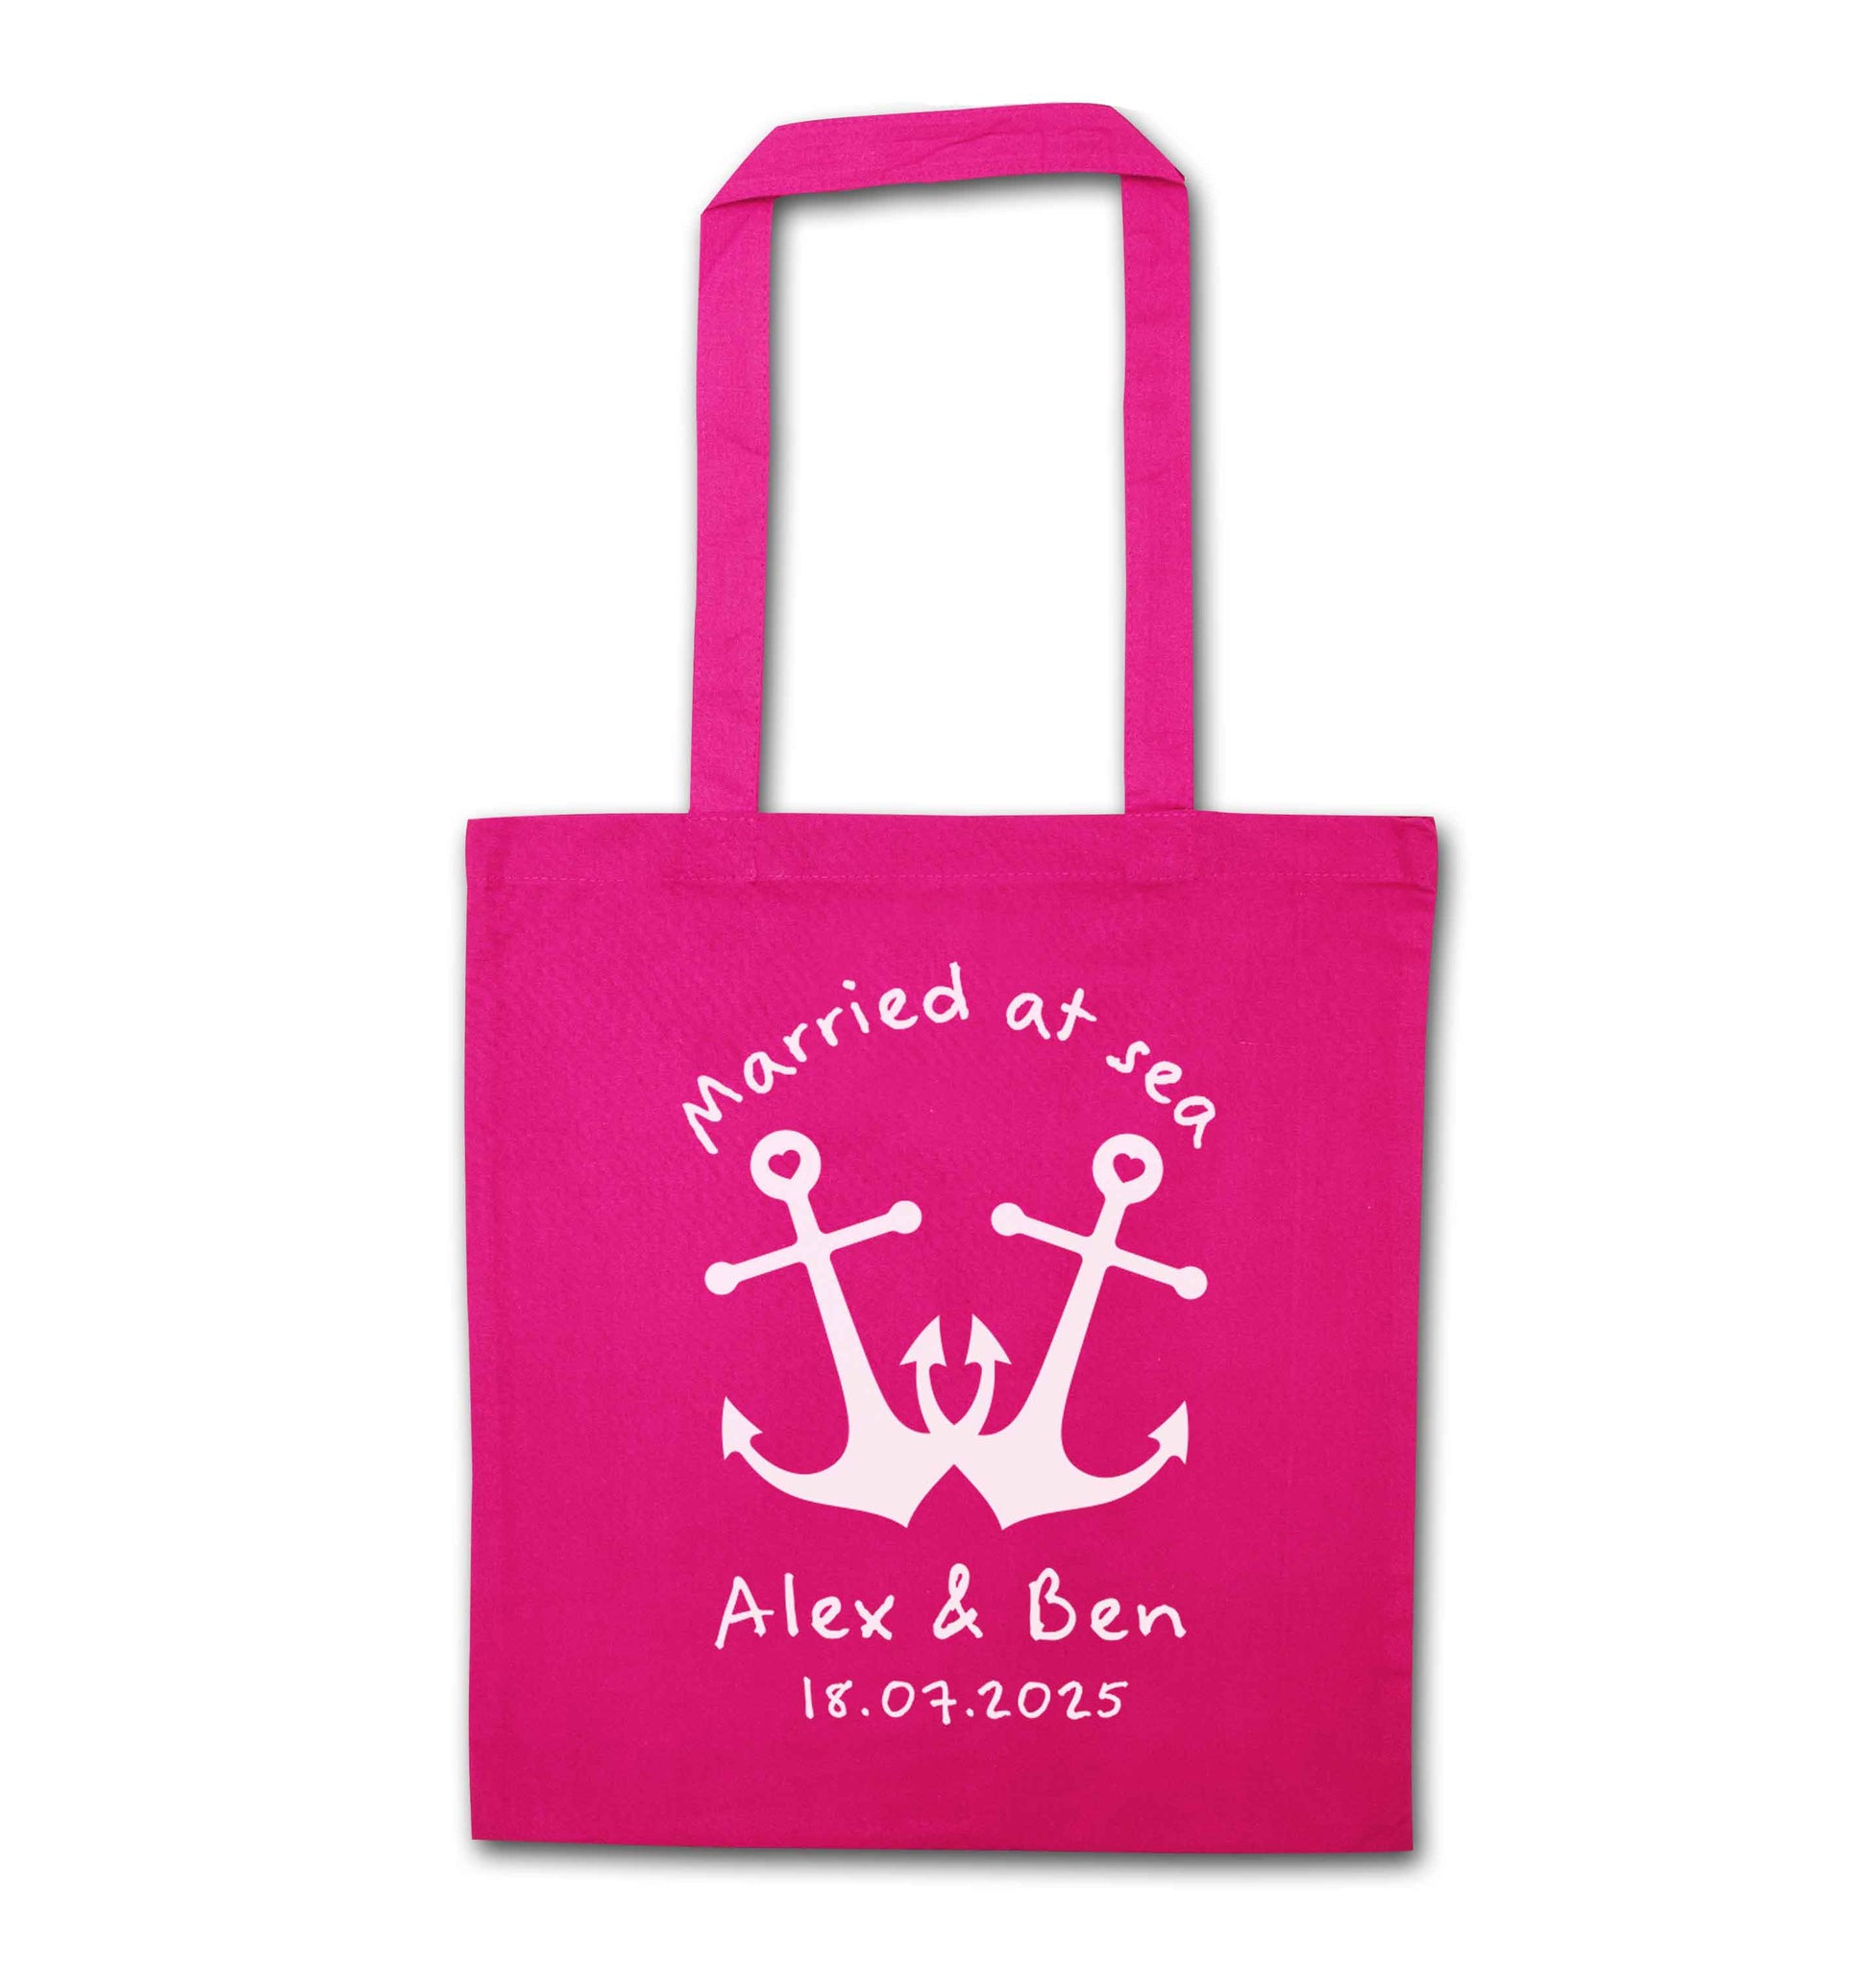 Married at sea blue anchors pink tote bag